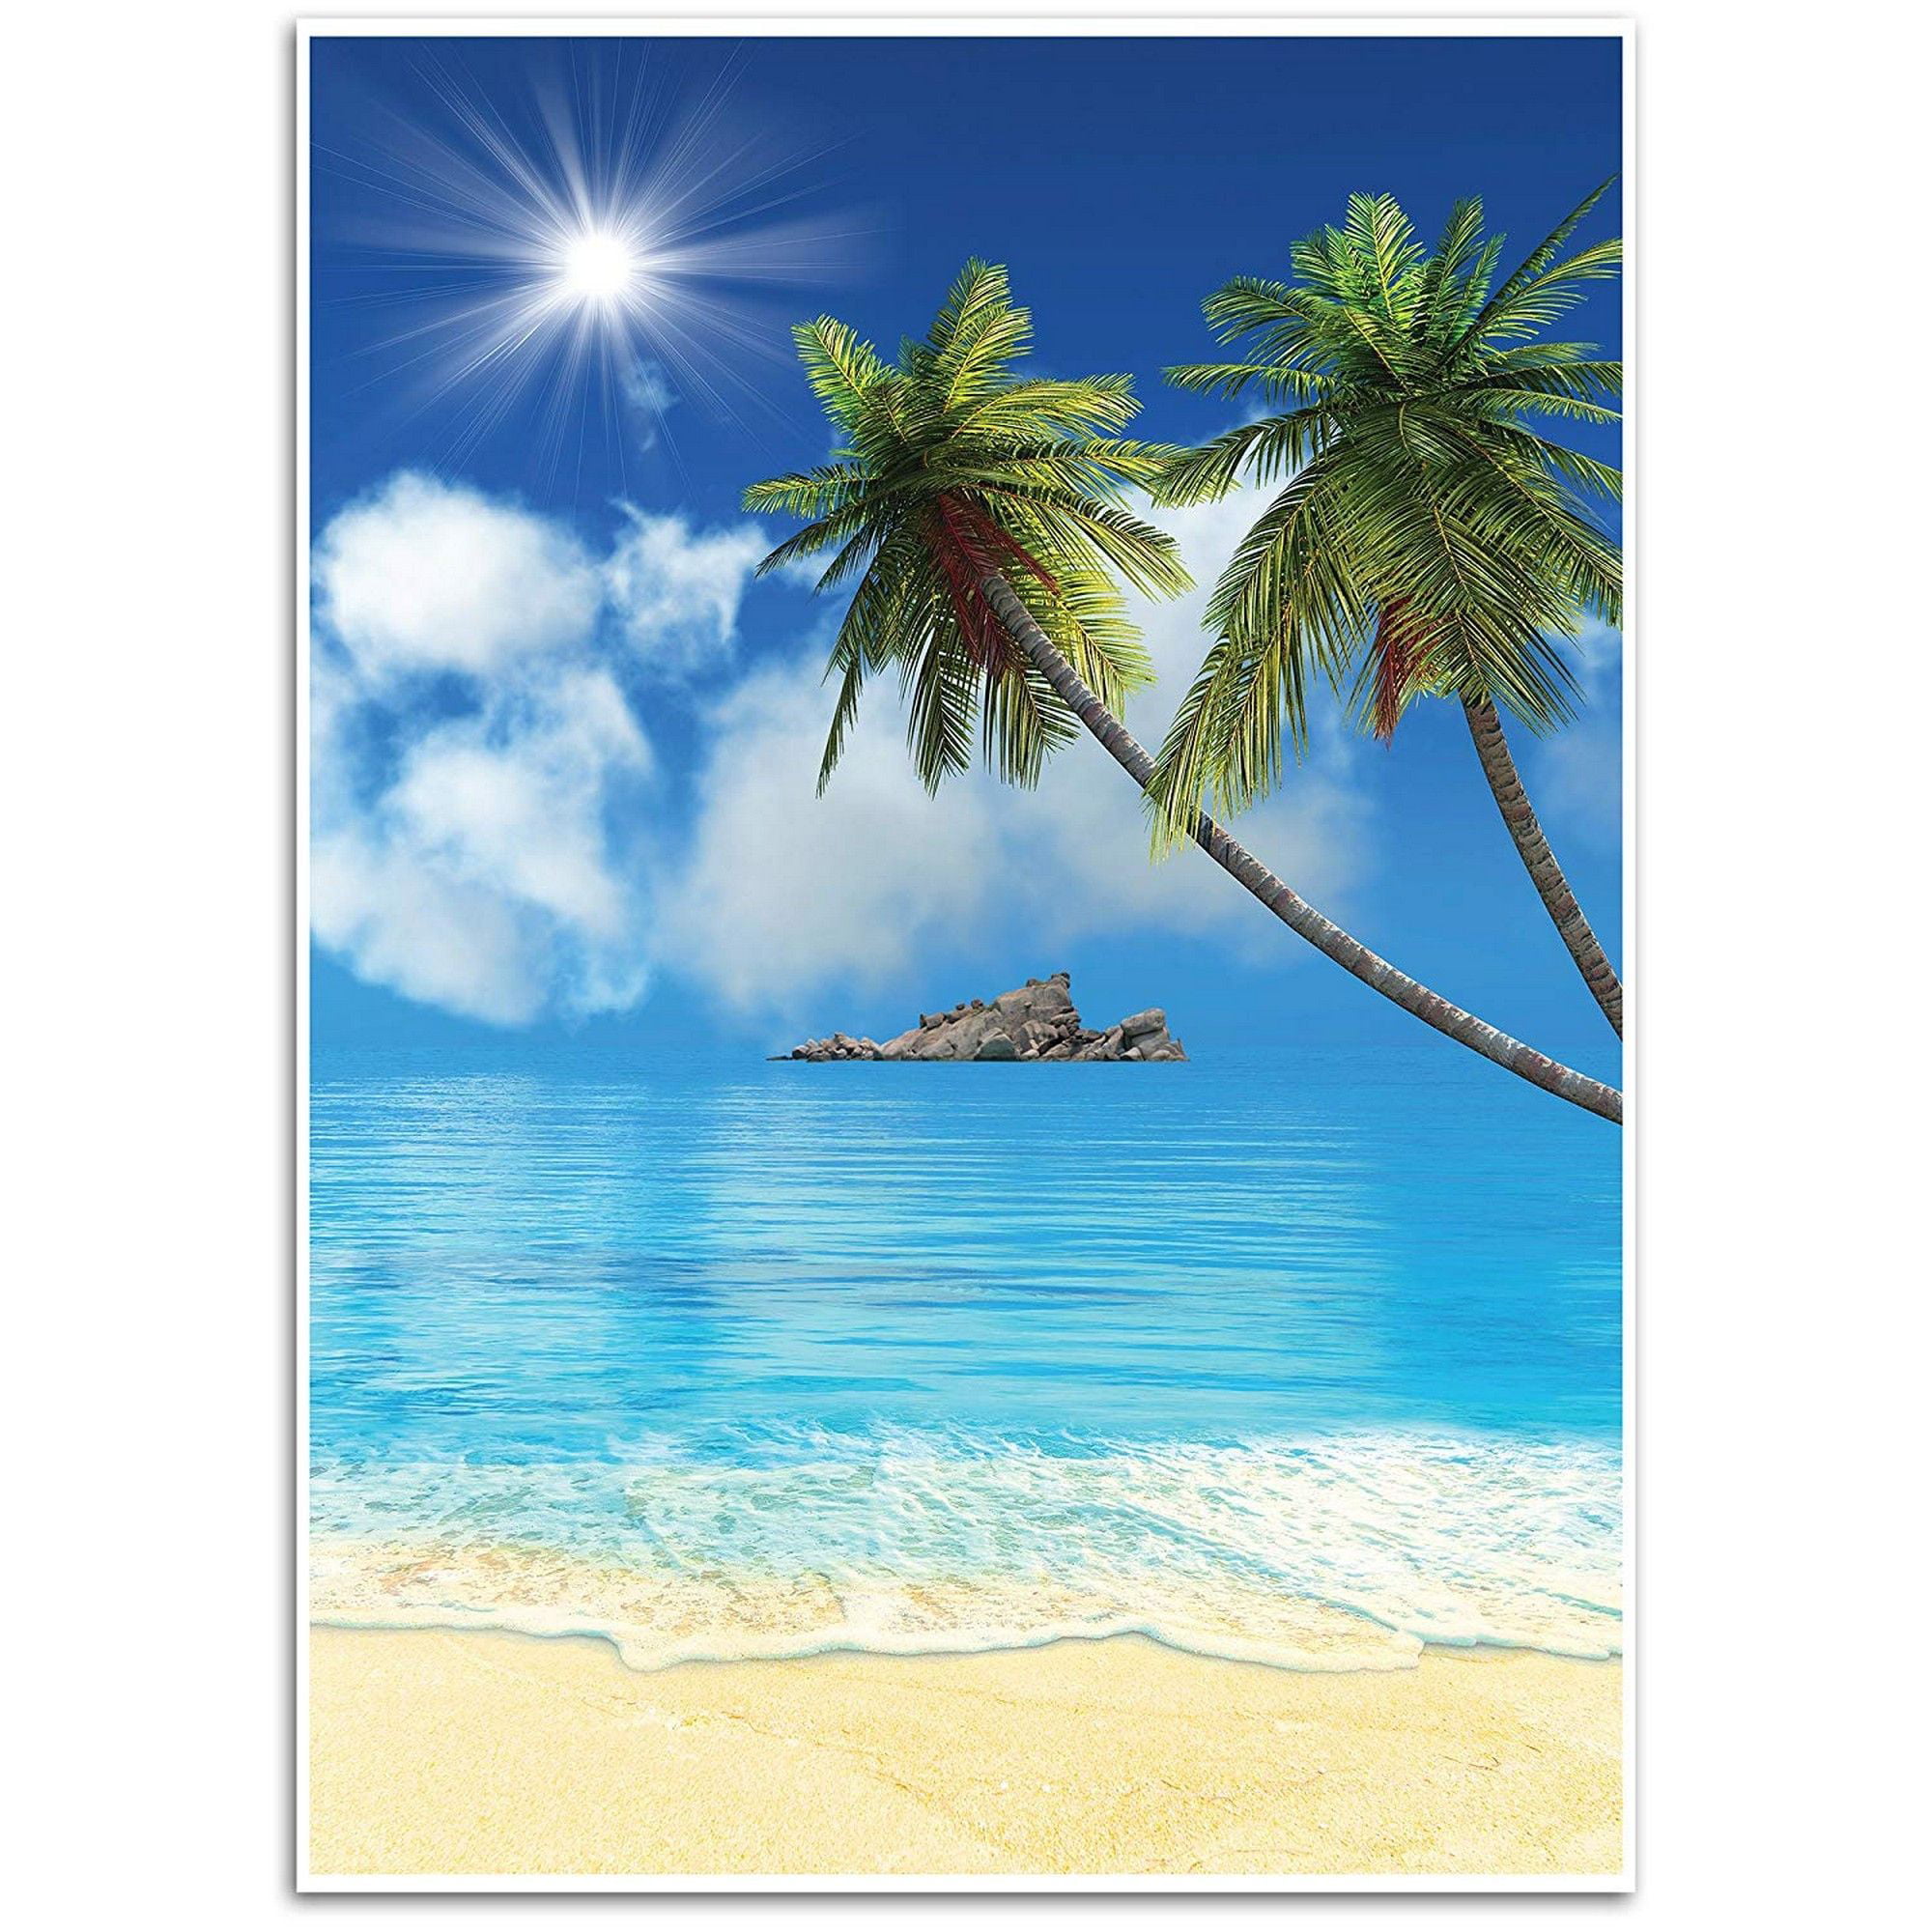 YEELE 12x8ft Sea View Photography Backdrop Tropical Beach with Coco Palm Tree Background Hawaiian Seaside Vacation Kid Adult Portrait Photoshoot Studio Props Summer Holiday Tourism Wedding Wallpaper